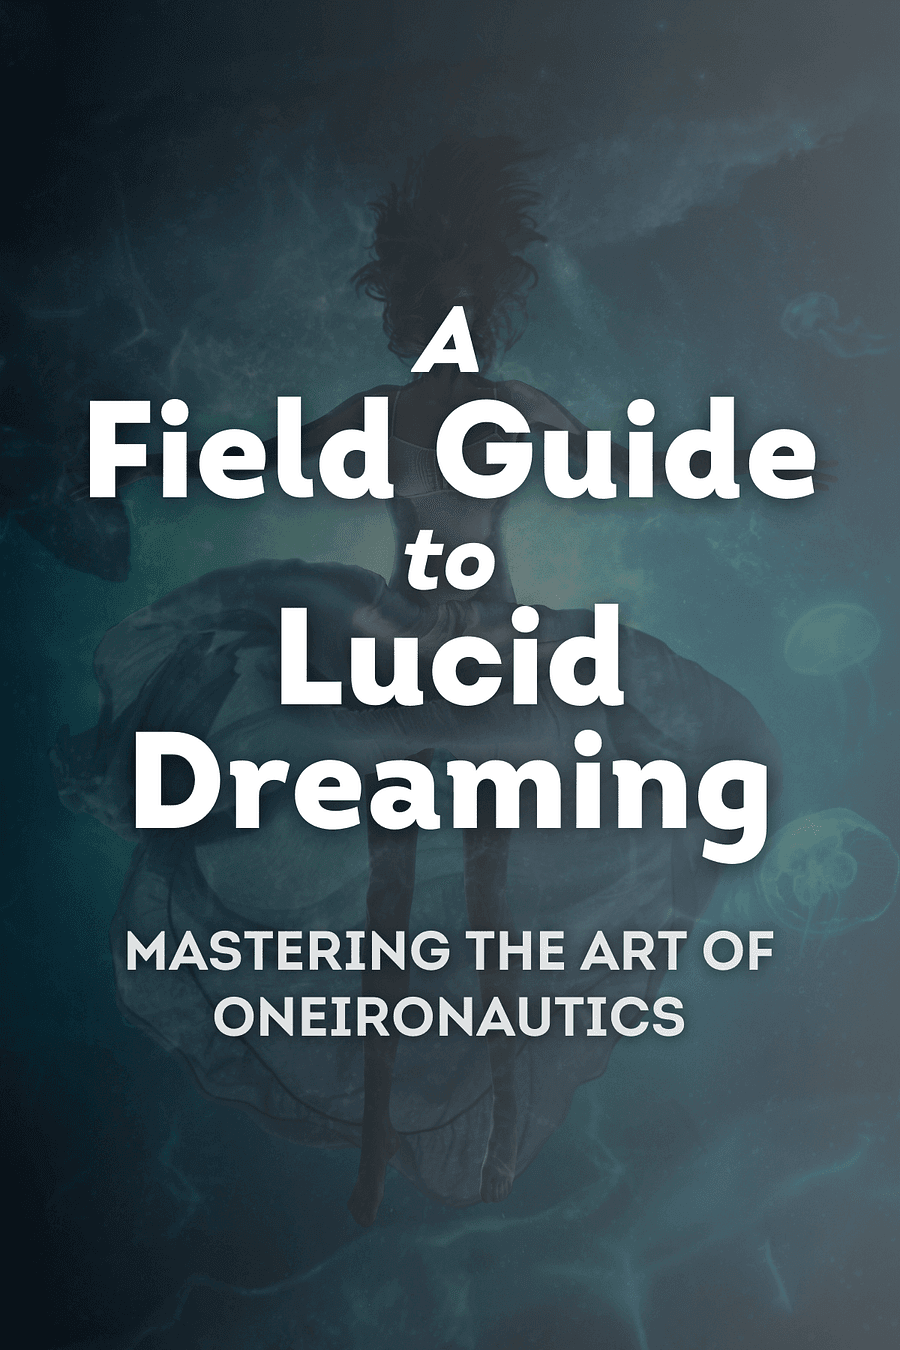 A Field Guide to Lucid Dreaming by Dylan Tuccillo, Jared Zeizel, Thomas Peisel - Book Summary